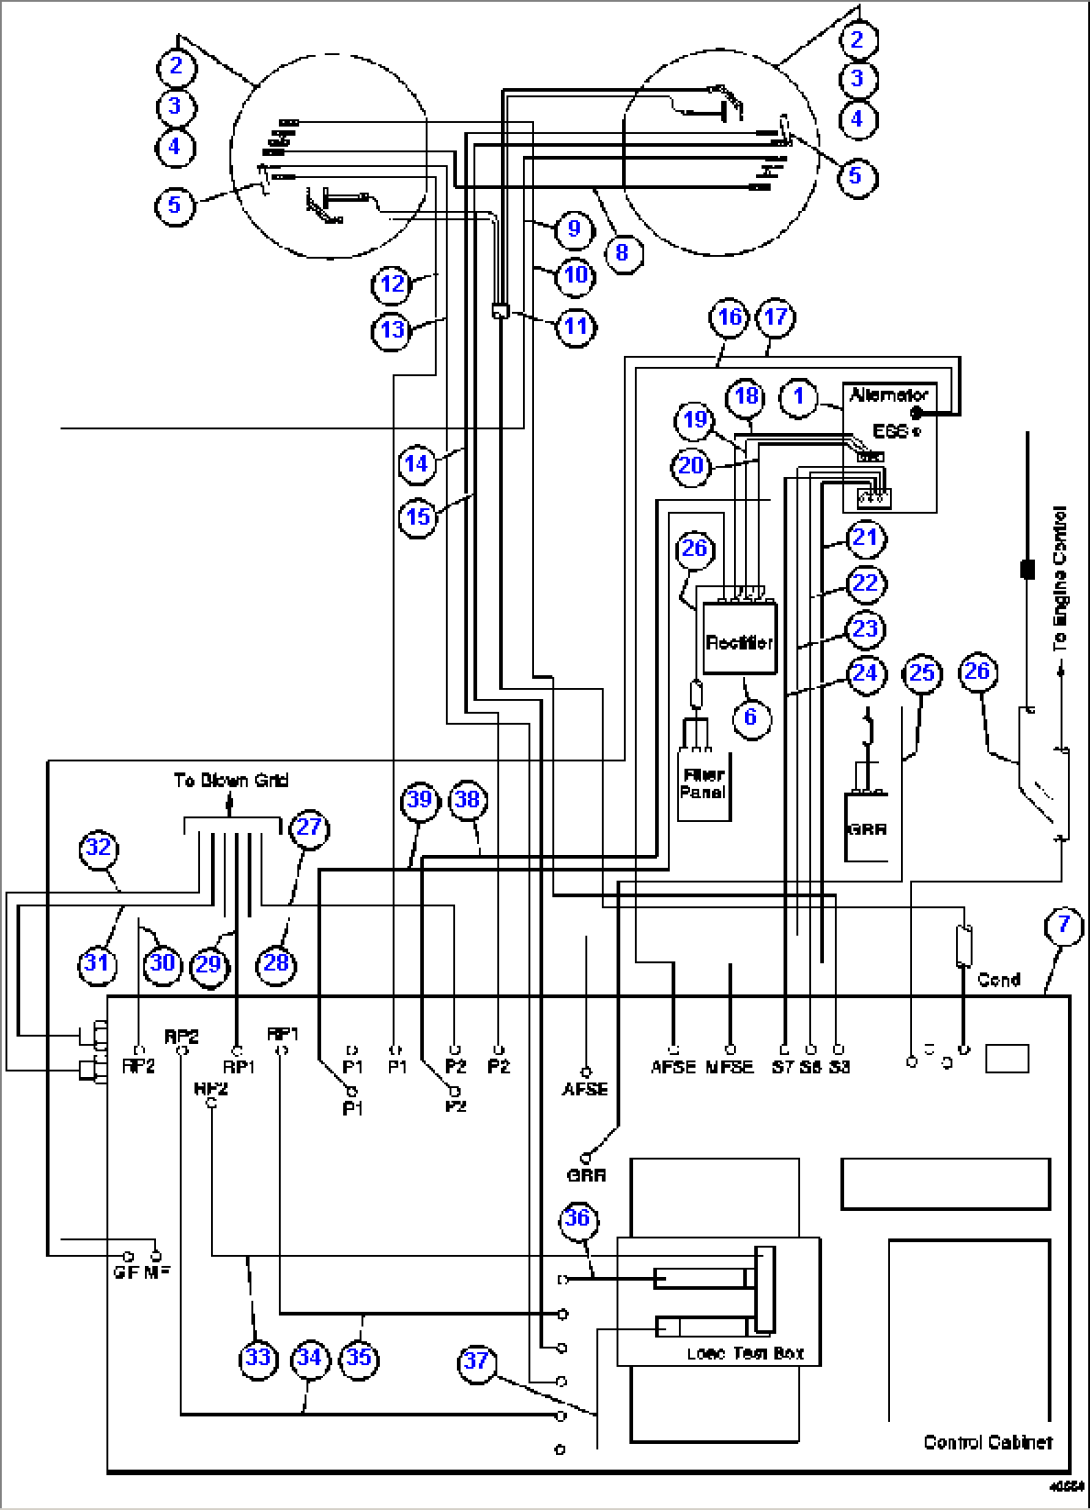 ELECTRIC POWER COMPONENTS WIRING 1/2